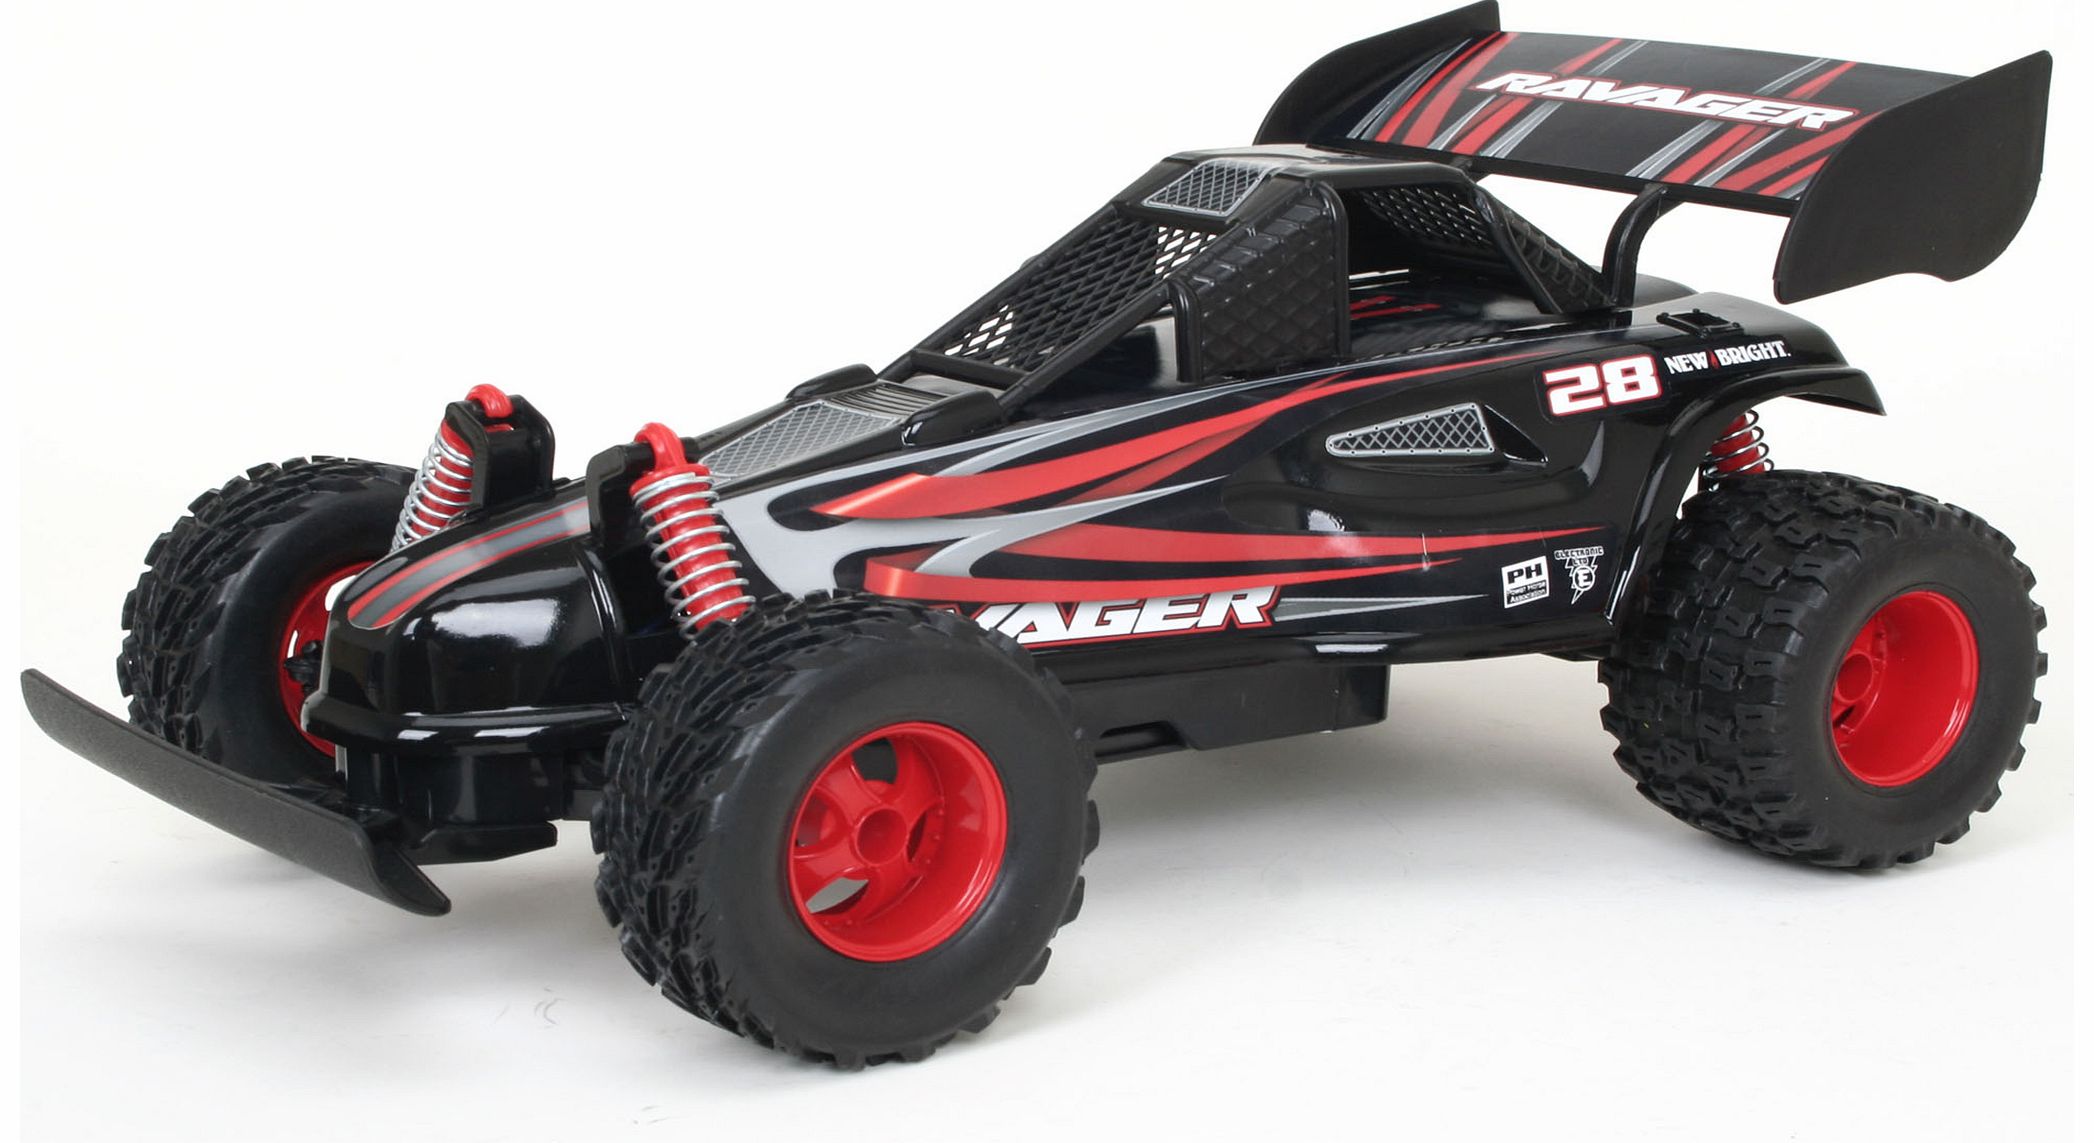 New Bright 1:16 RC Baja Extreme Ravager Buggy